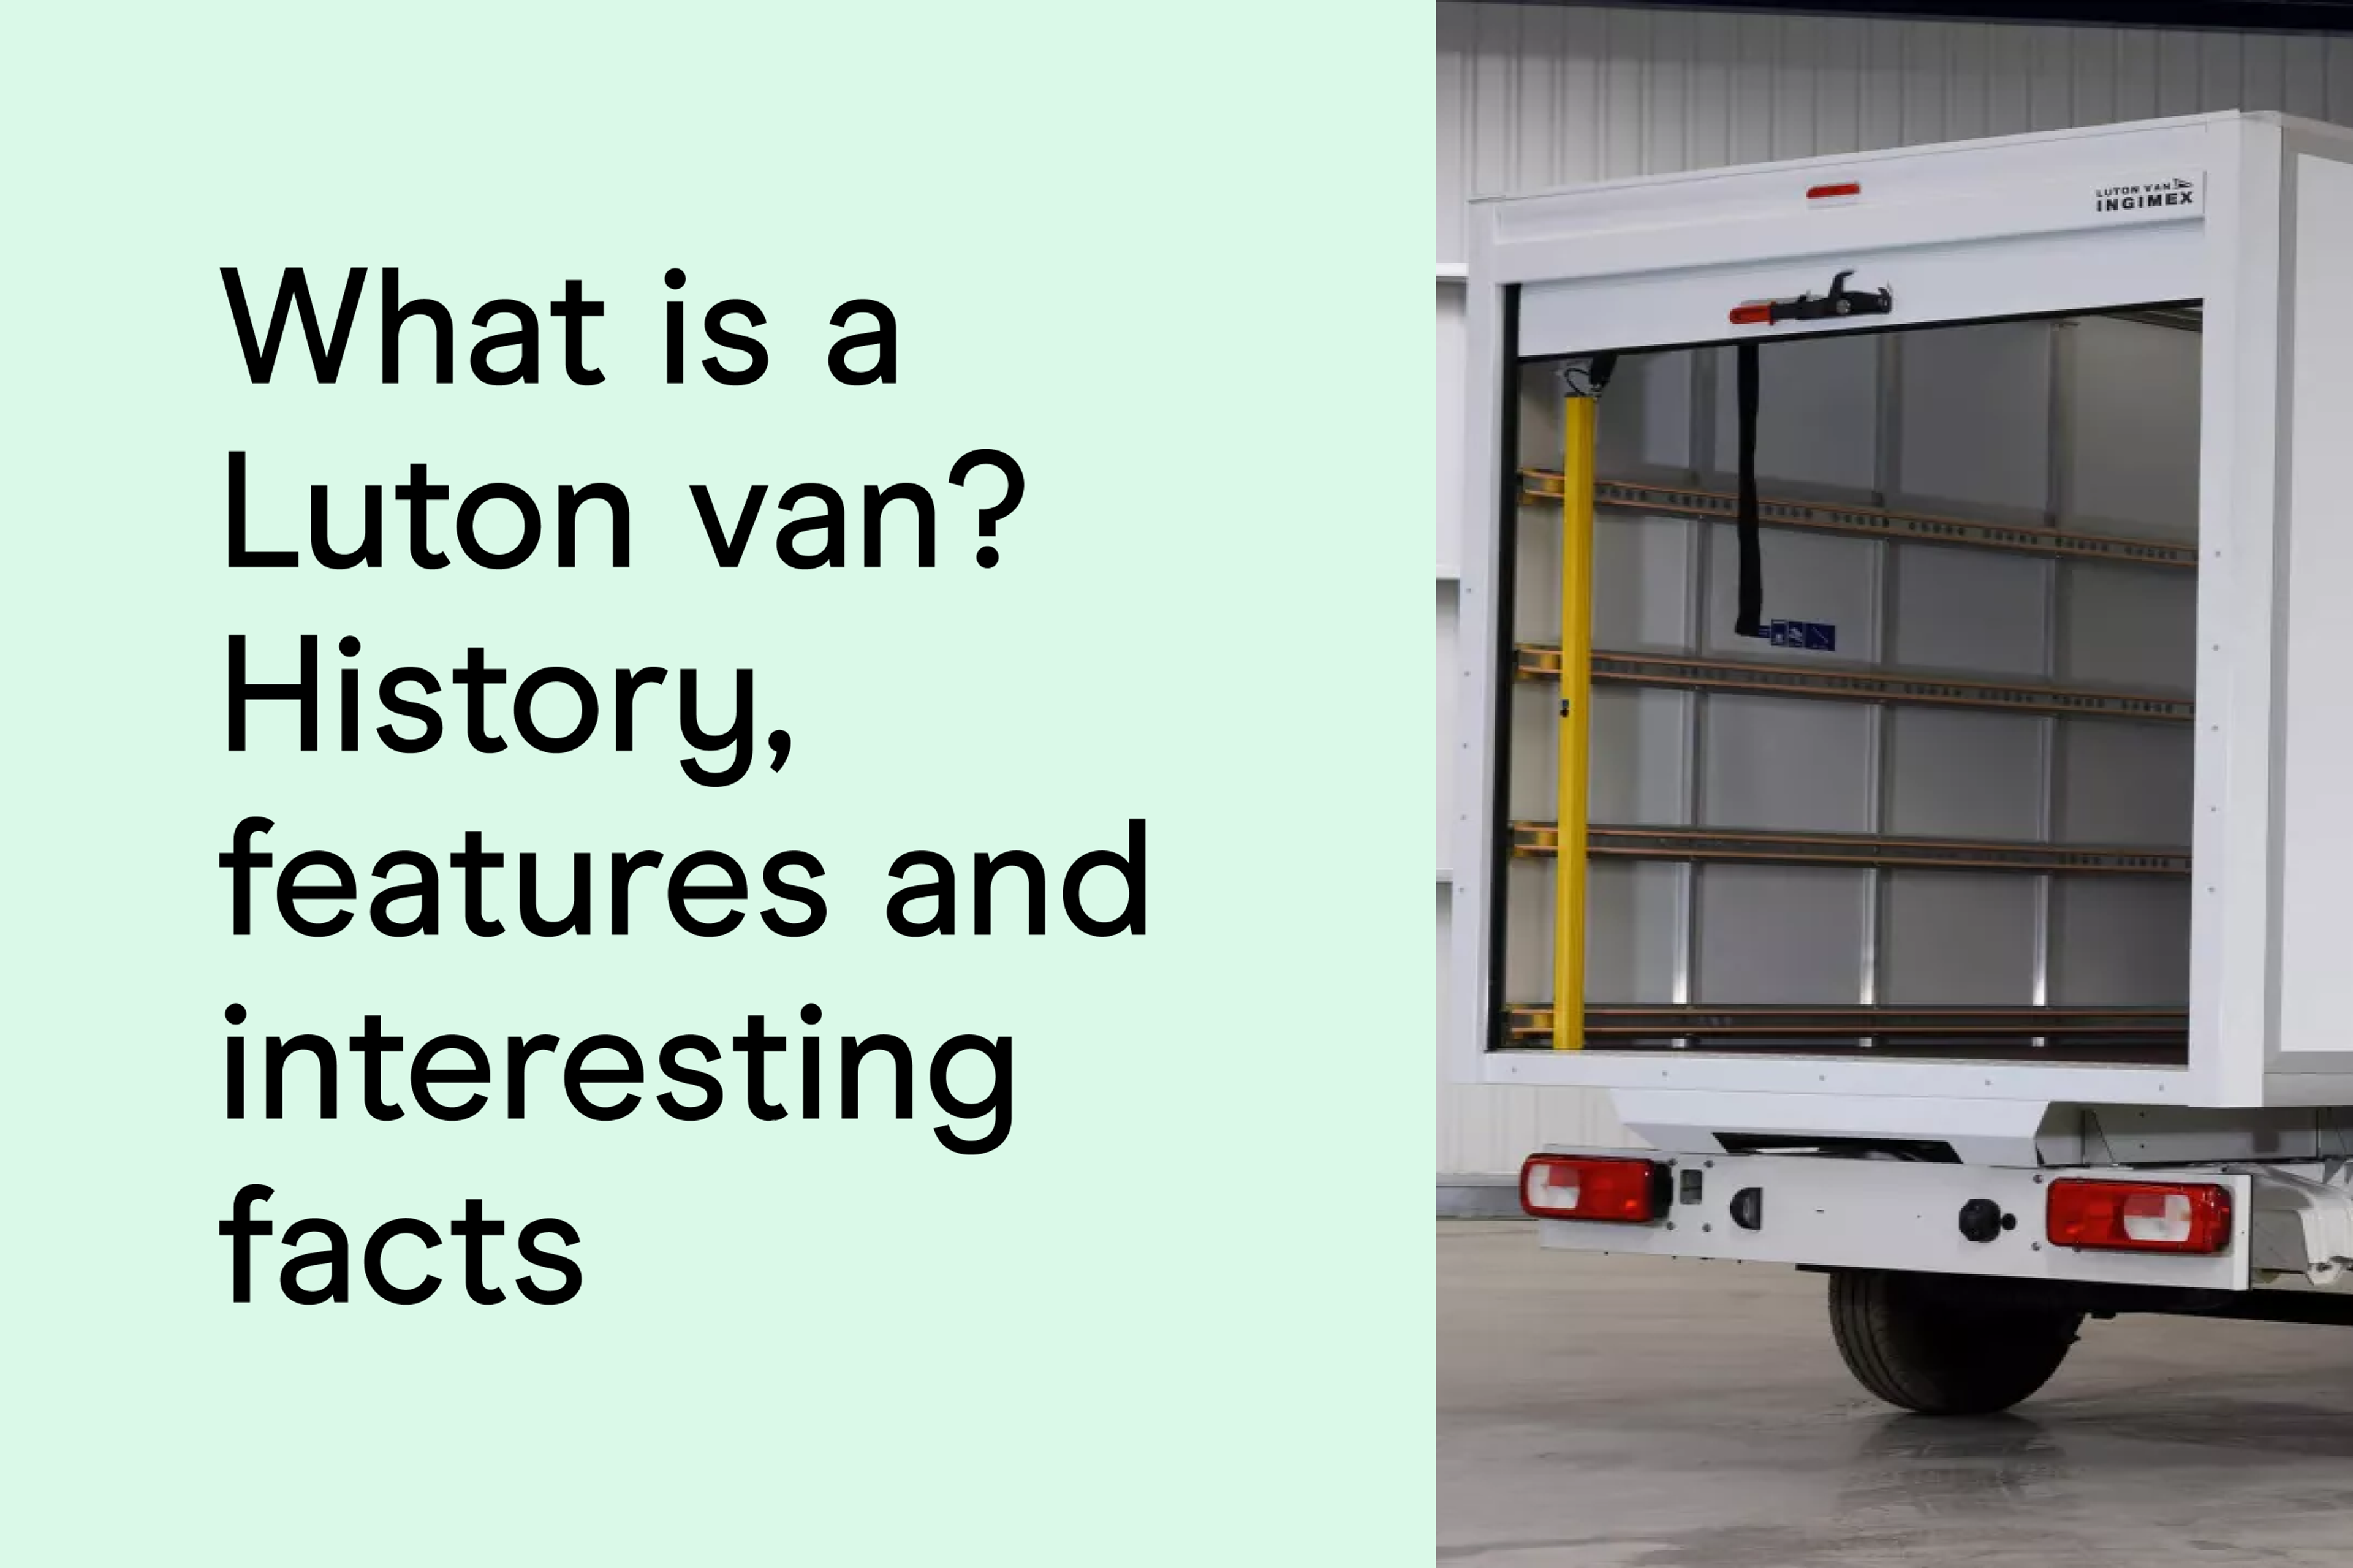 What is a Luton van? History, features and interesting facts